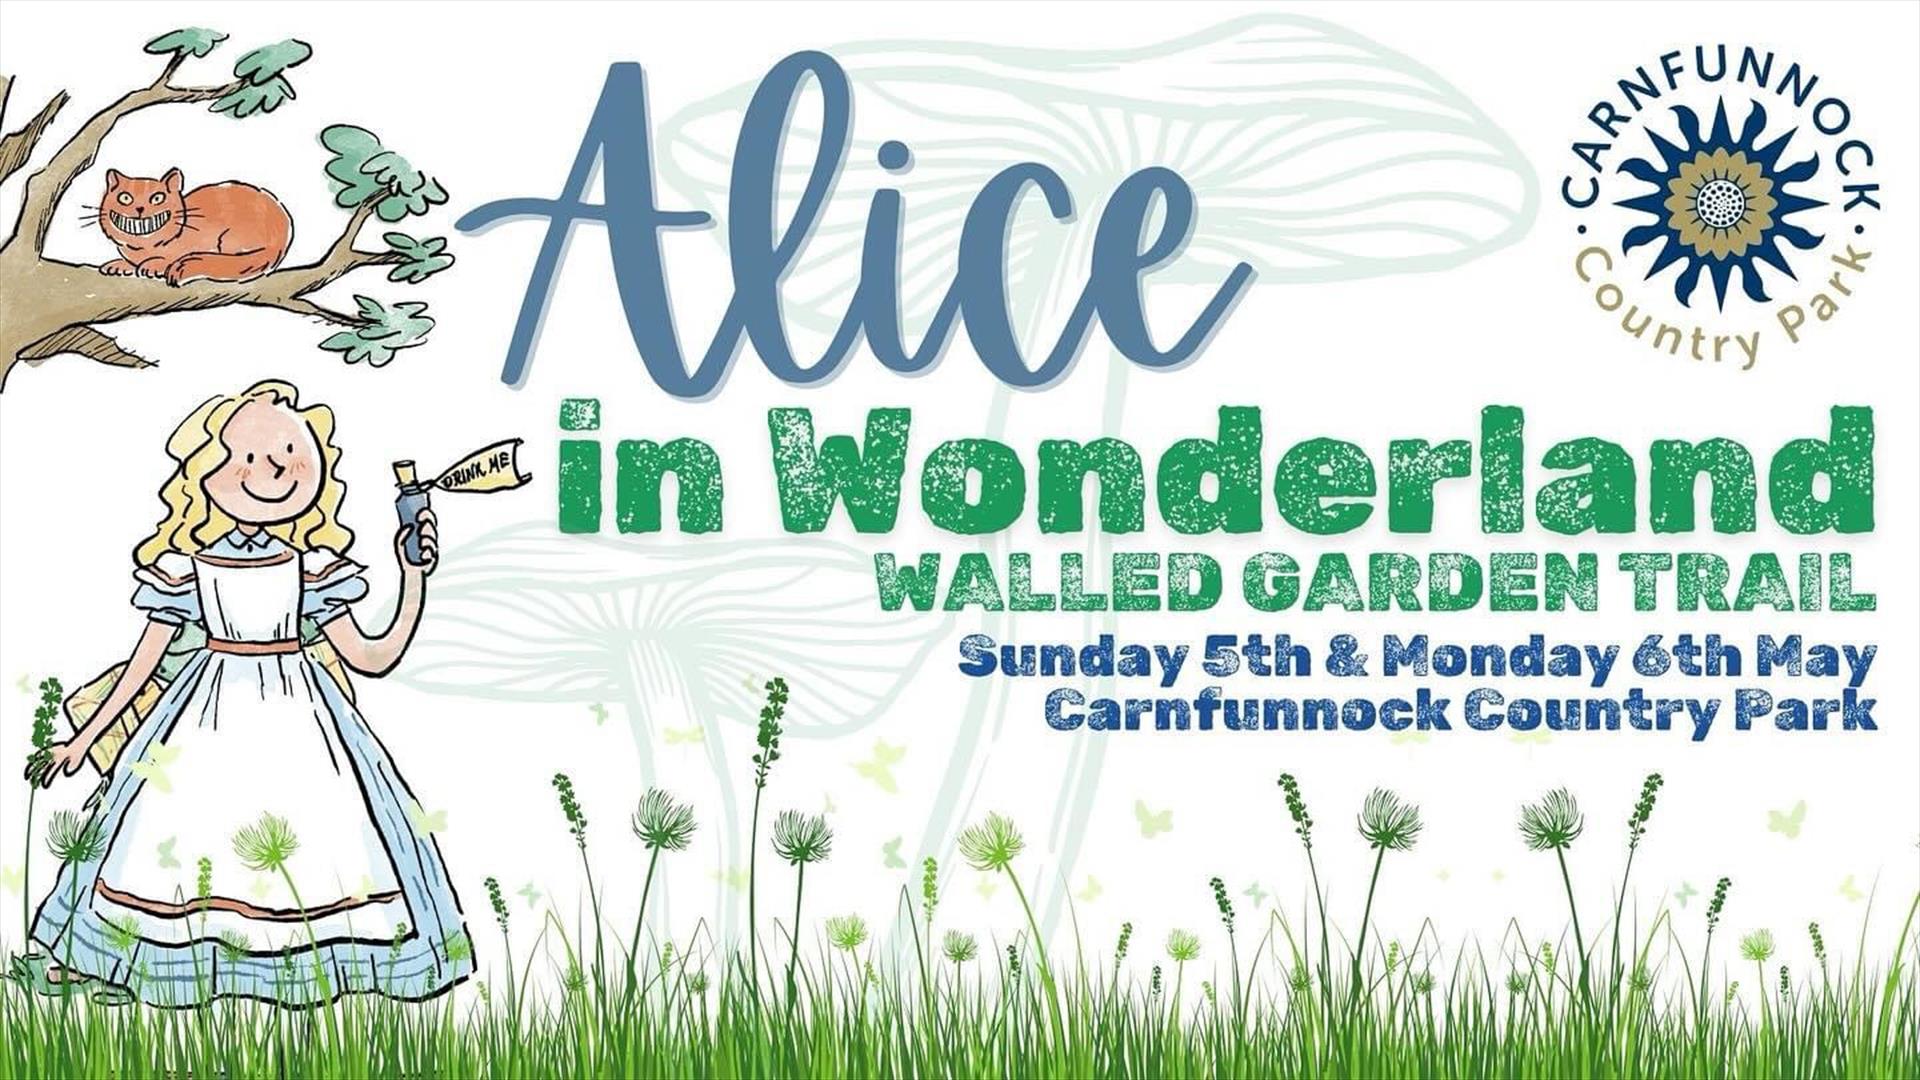 Alice in Wonderland Walled Garden Trail with dates and animated picture of Alice in a garden